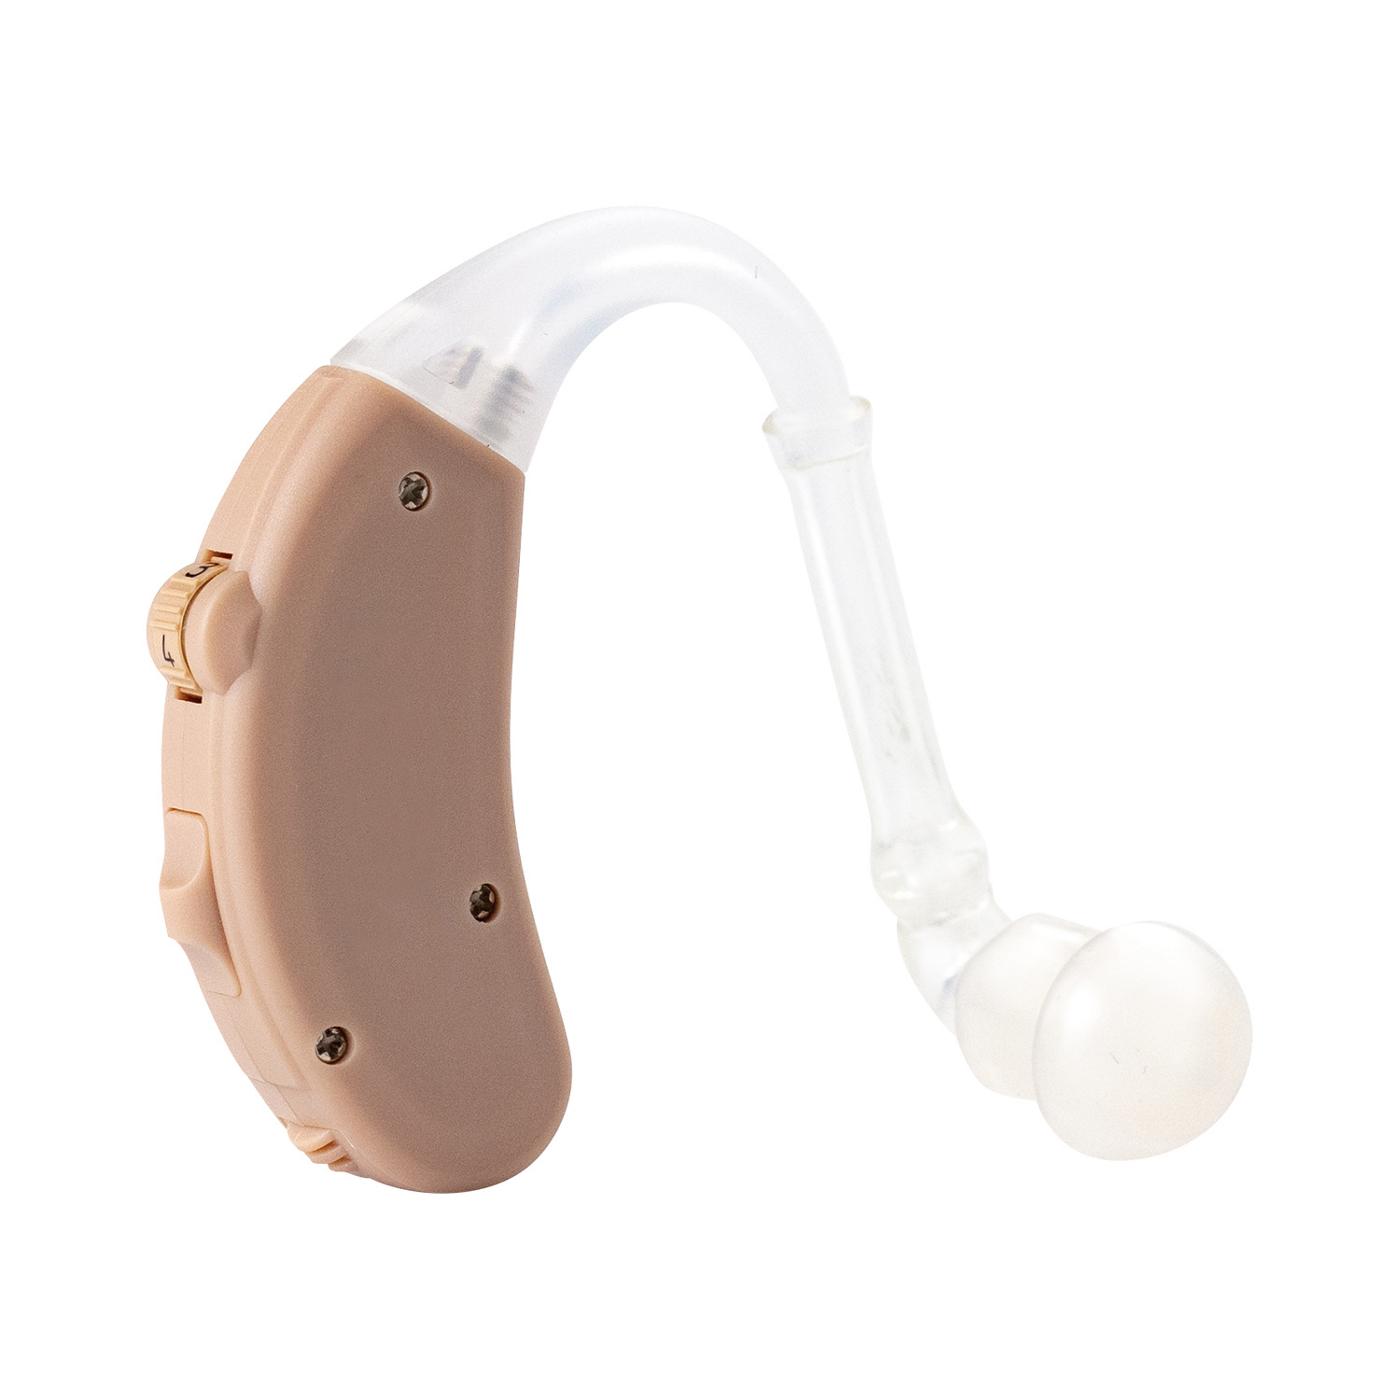 Lucid Audio Behind The Ear Enrich Pro Sound Hearing Aids; image 4 of 6